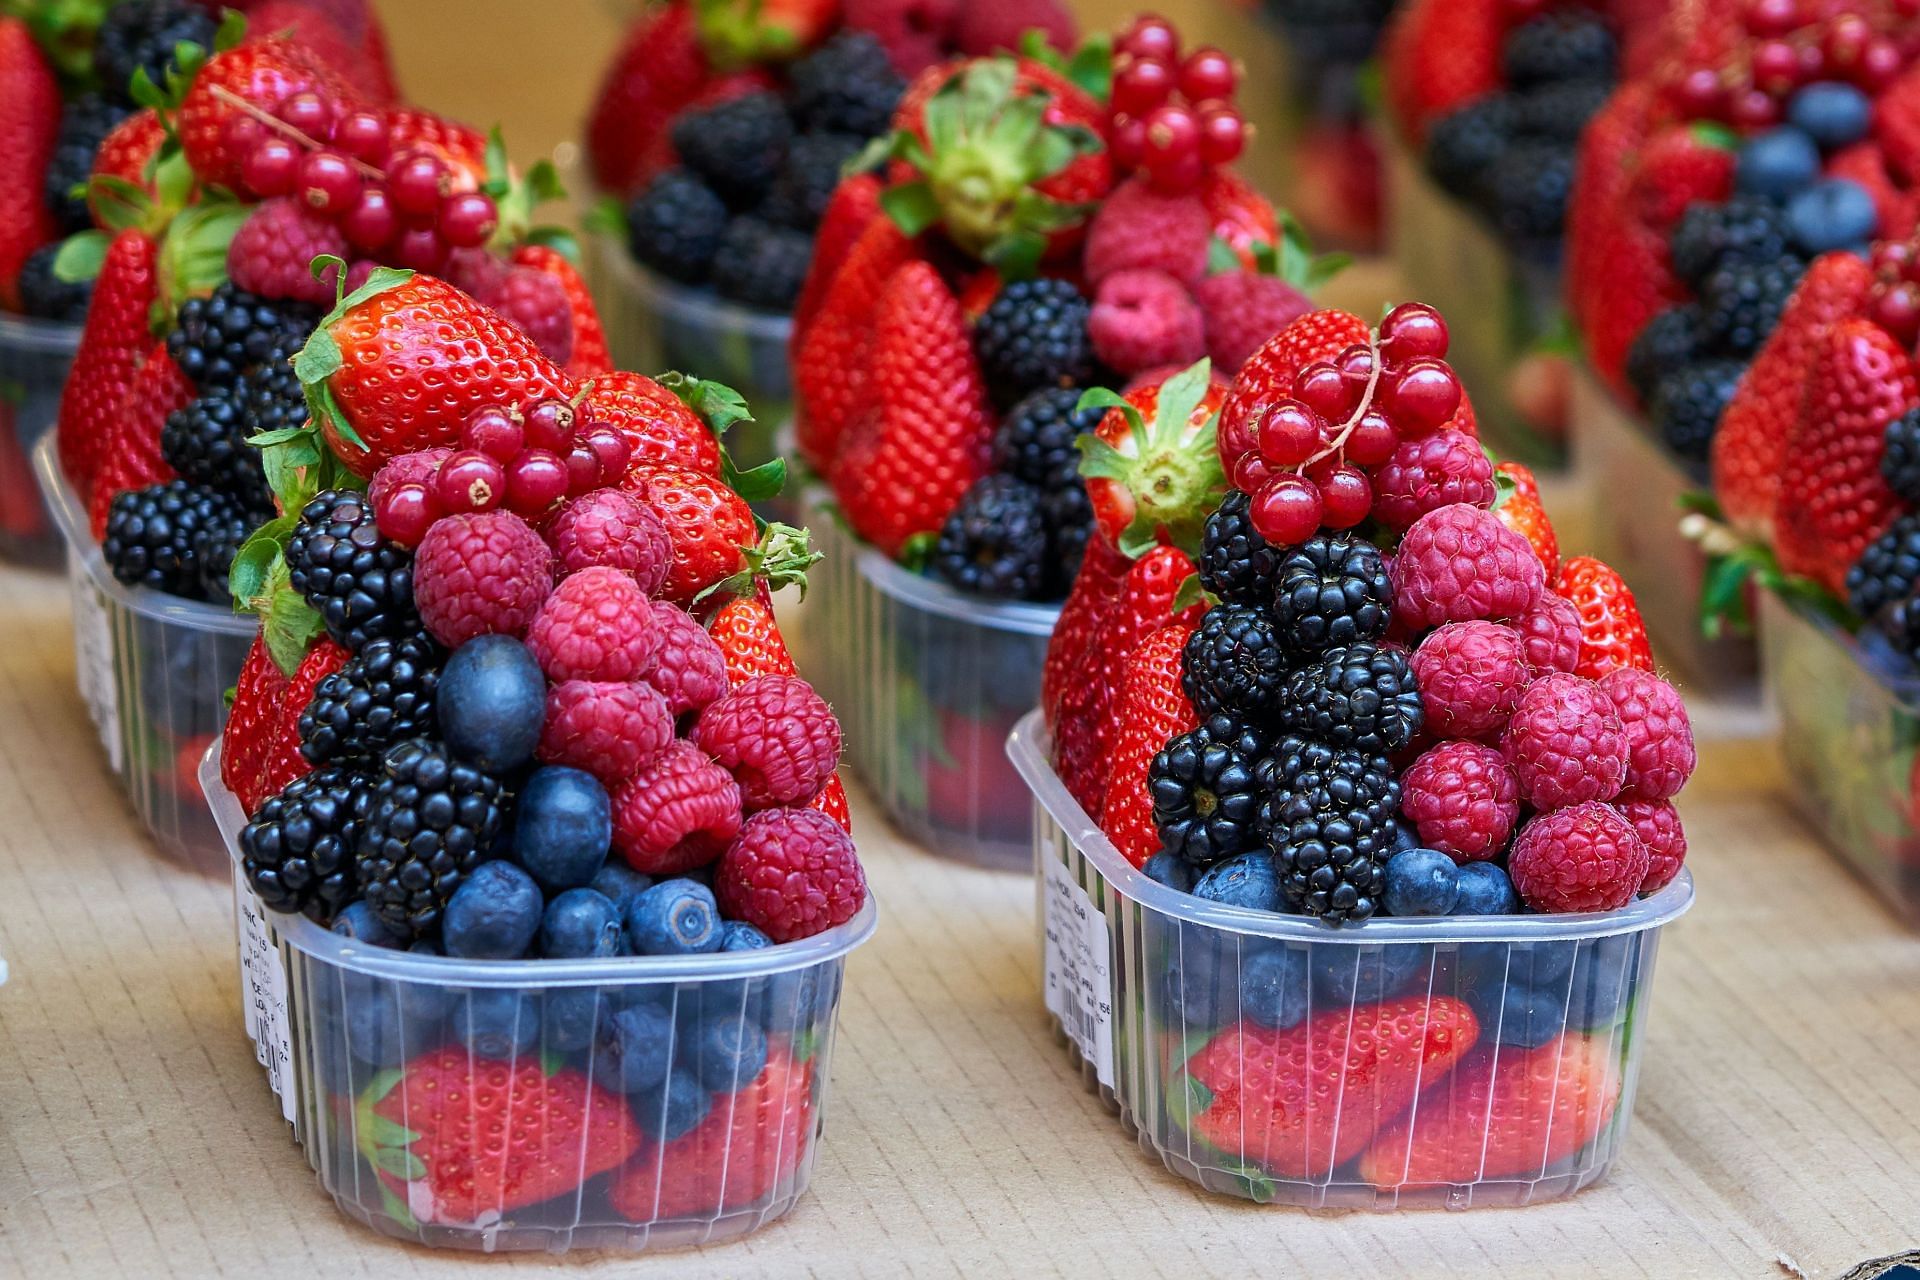 Berries are rich in antioxidants (Image via Unsplash/Timo Volz)